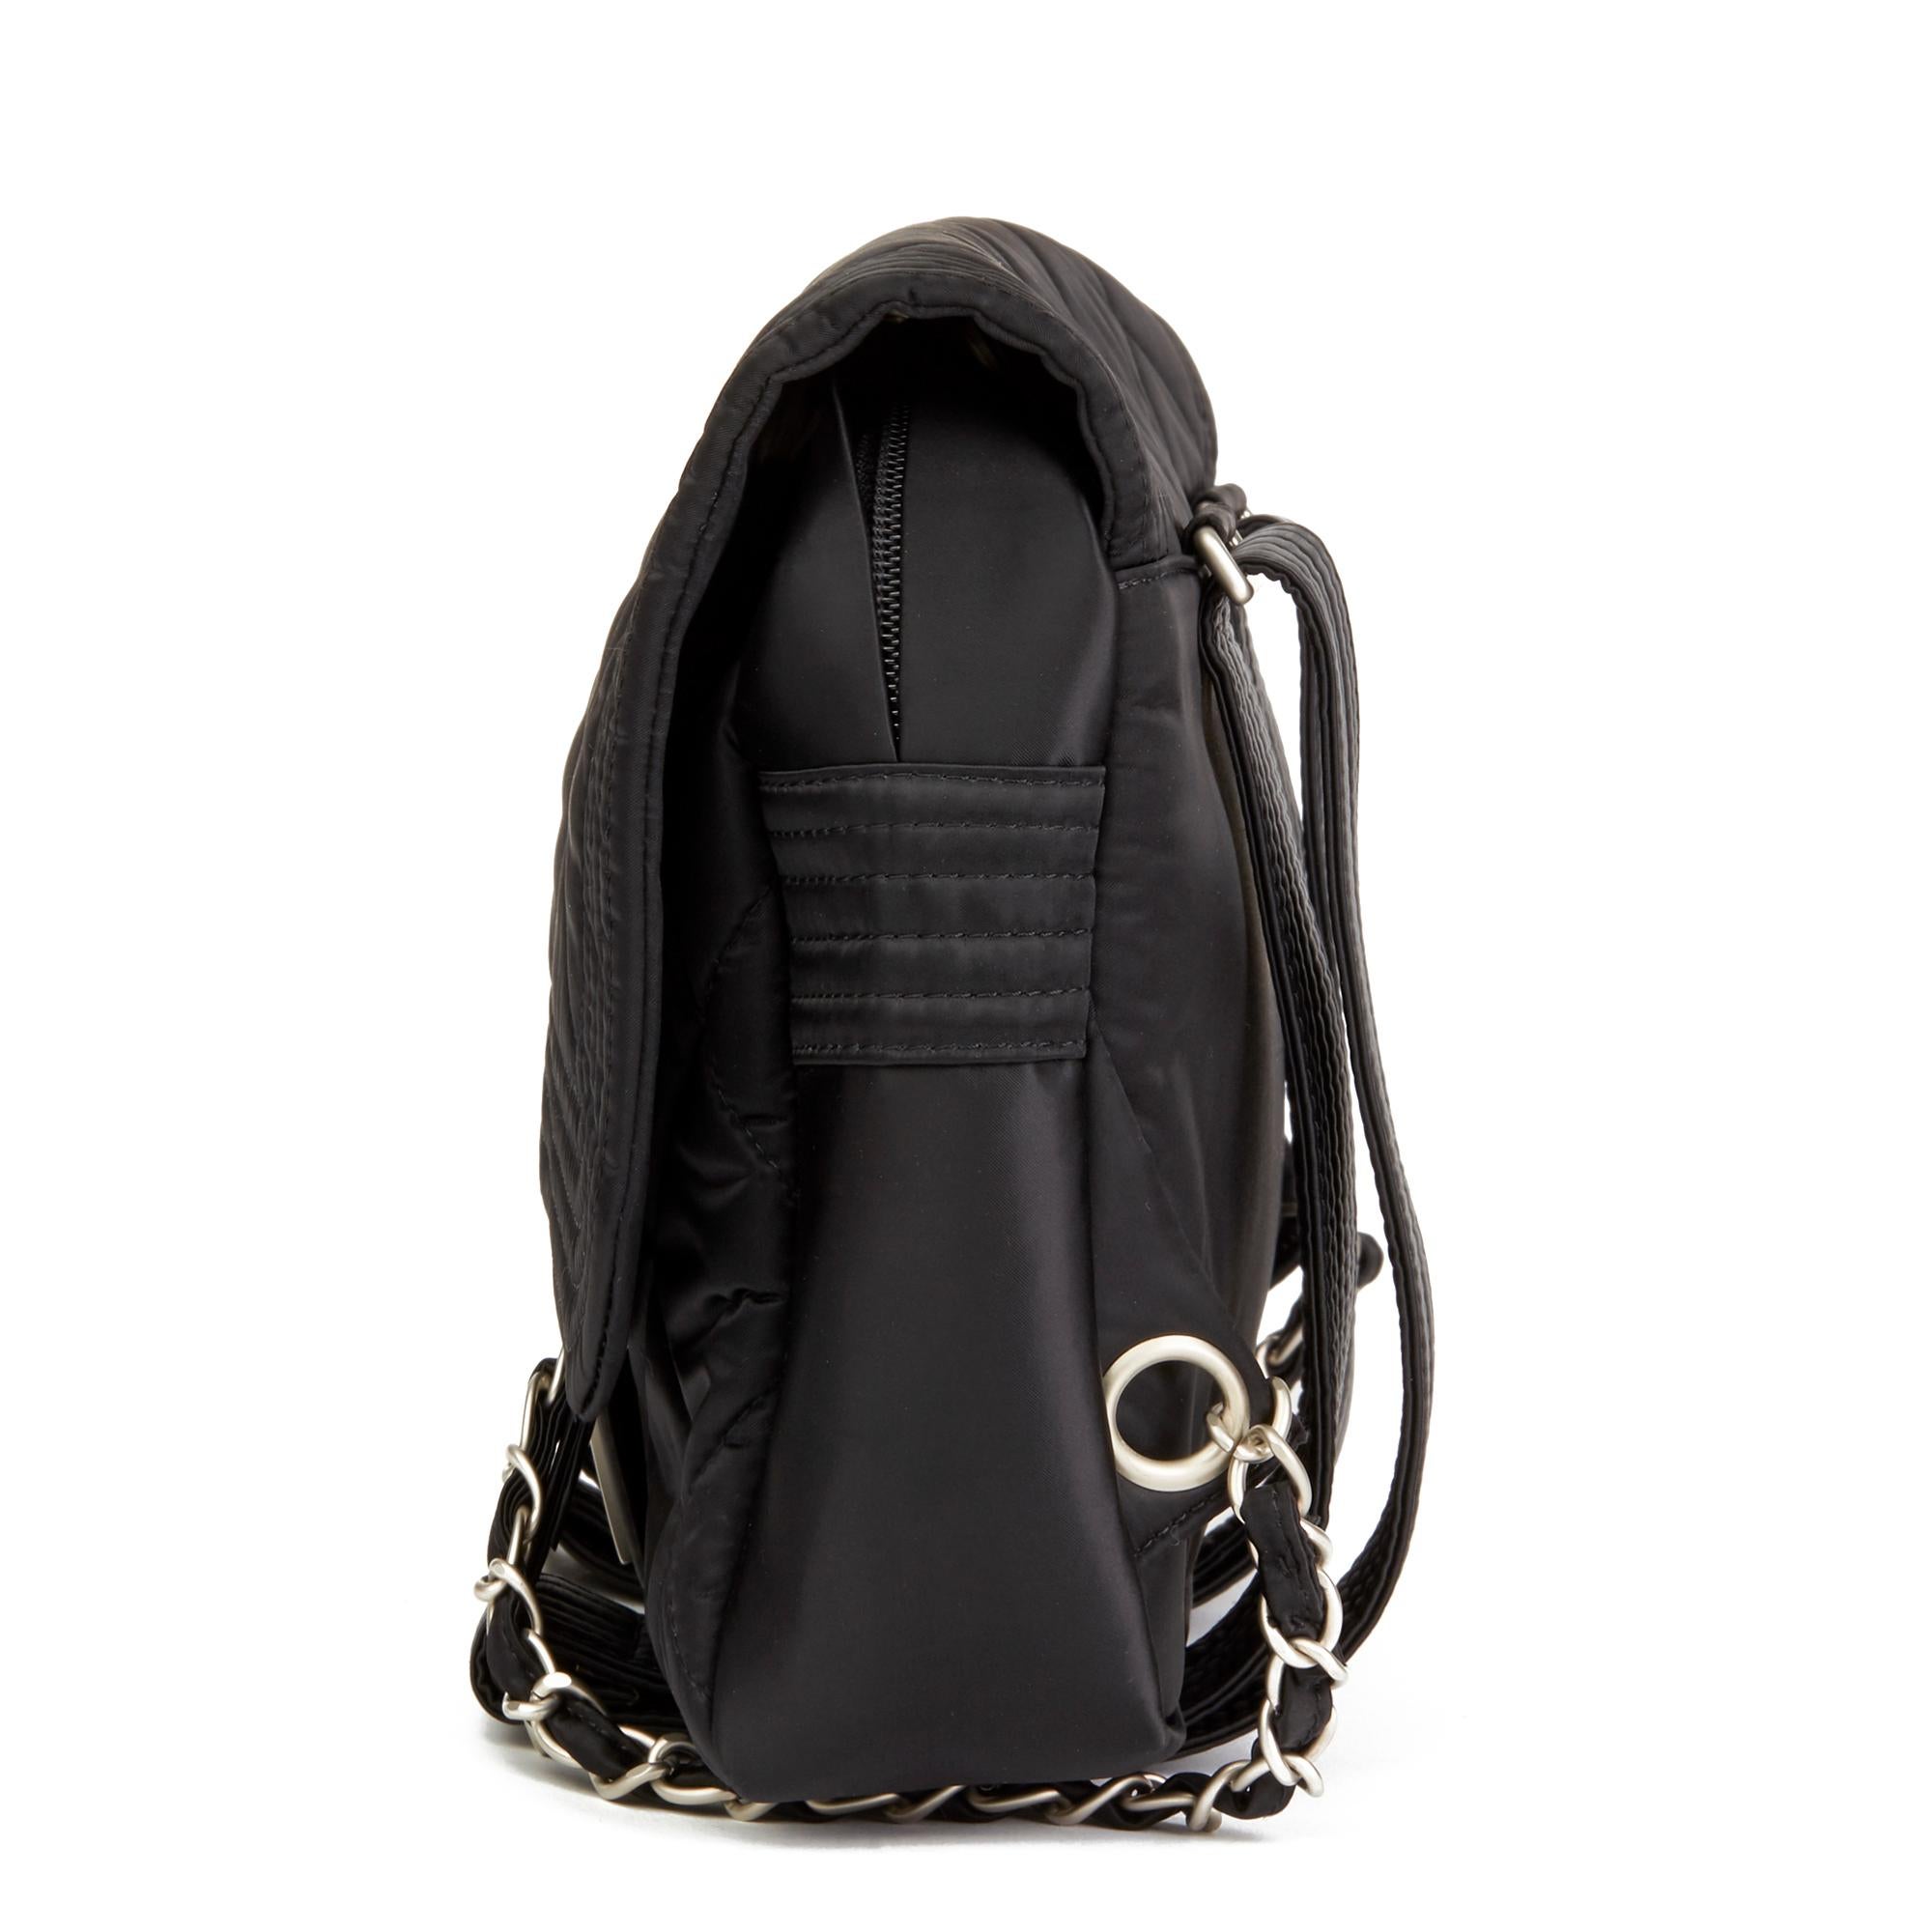 CHANEL
Black Quilted Nylon Sports Line Backpack

Reference: HB2477
Serial Number: 10307123
Age (Circa): 2005
Authenticity Details: Serial Sticker (Made in Italy)
Gender: Ladies
Type: Backpack 

Colour: Black
Hardware: Matte Silver
Material(s):